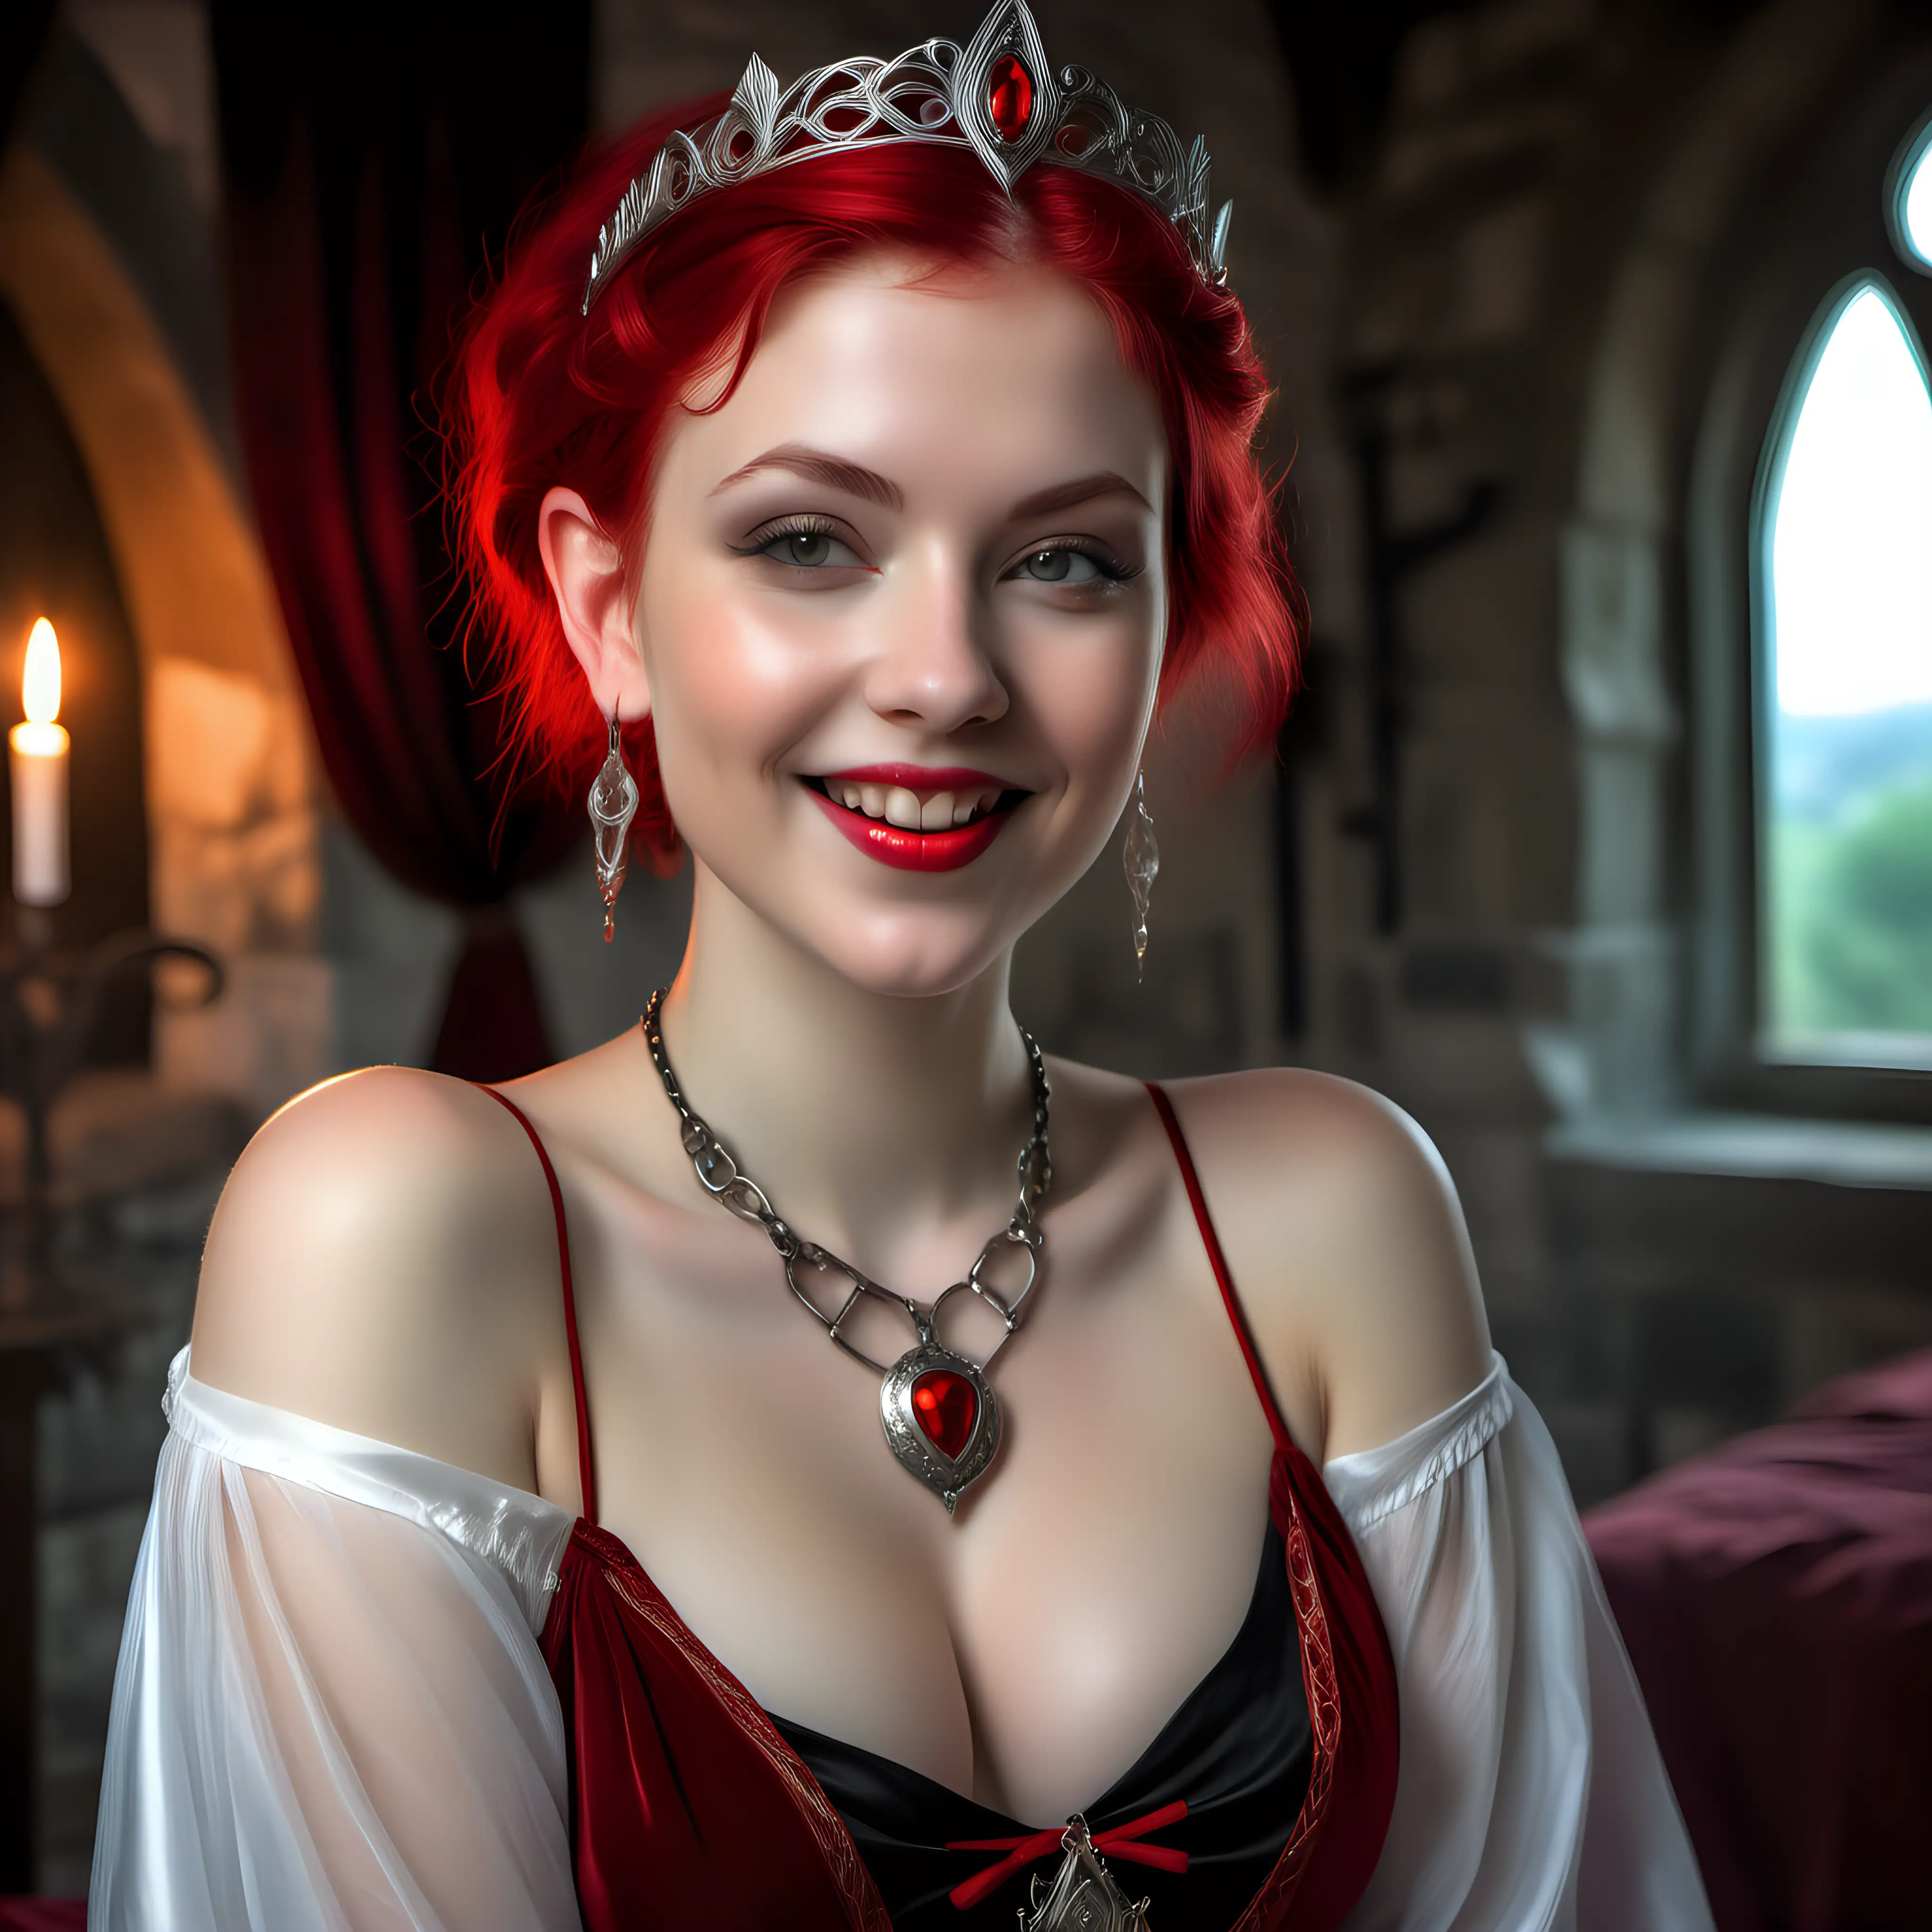 Beautiful voluptuous elf princess, age 22 years, short white hair, red hair pins, pale flawless skin, radiant smile, sheer white shawl, revealing red and black nightgown, red lipstick, red jeweled necklace and bracelets and earrings, medieval fantasy, castle bedroom, boudoir photography, hyper-detailed, hyper-realistic, closeup portrait